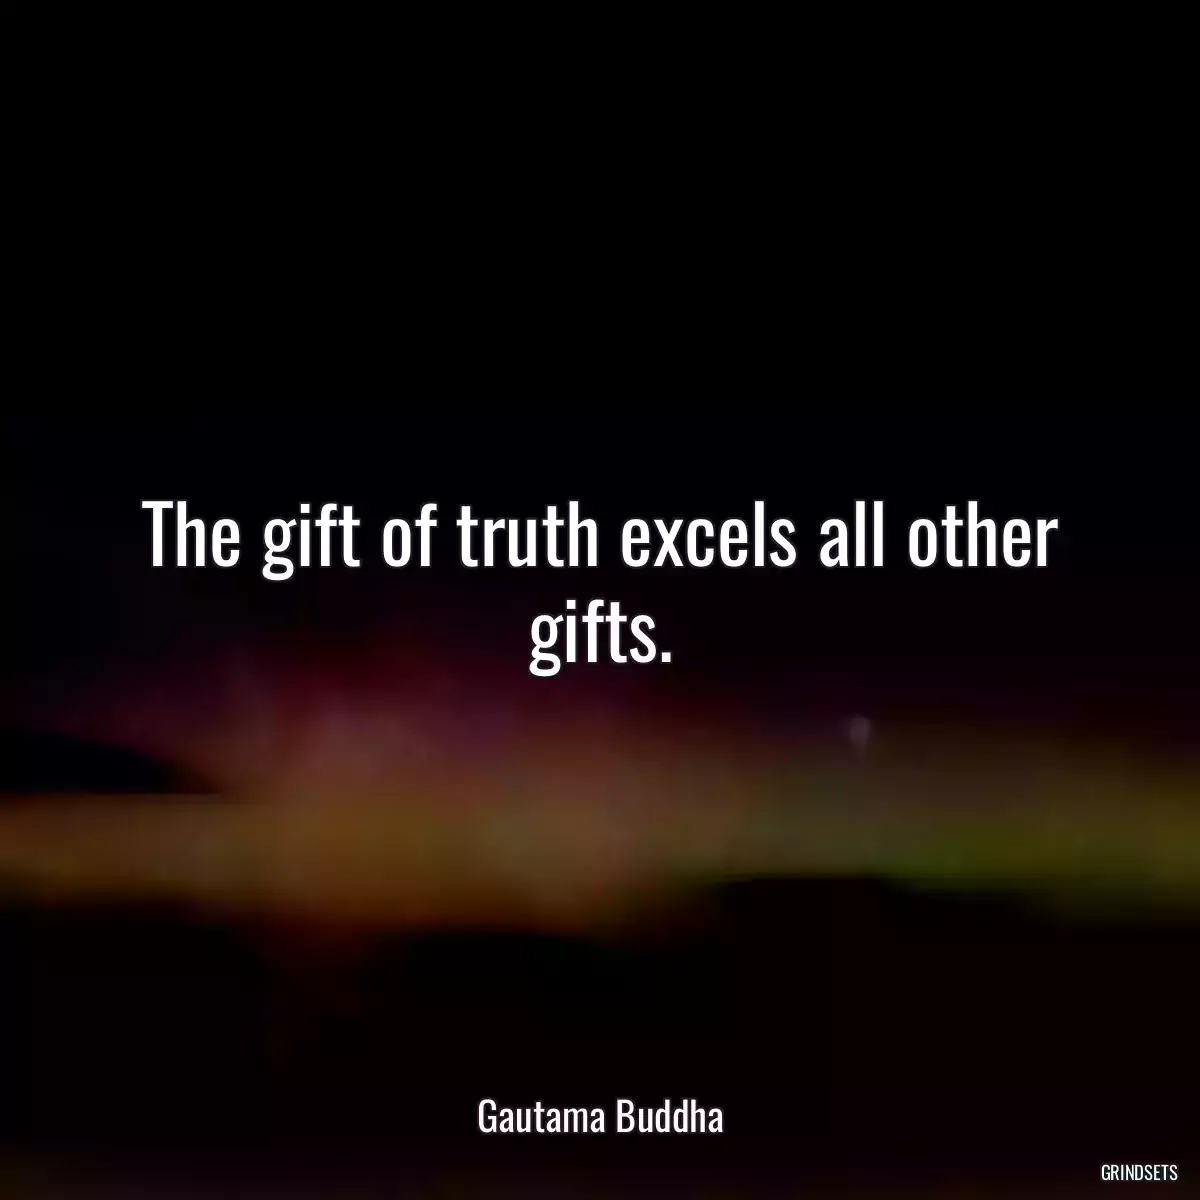 The gift of truth excels all other gifts.